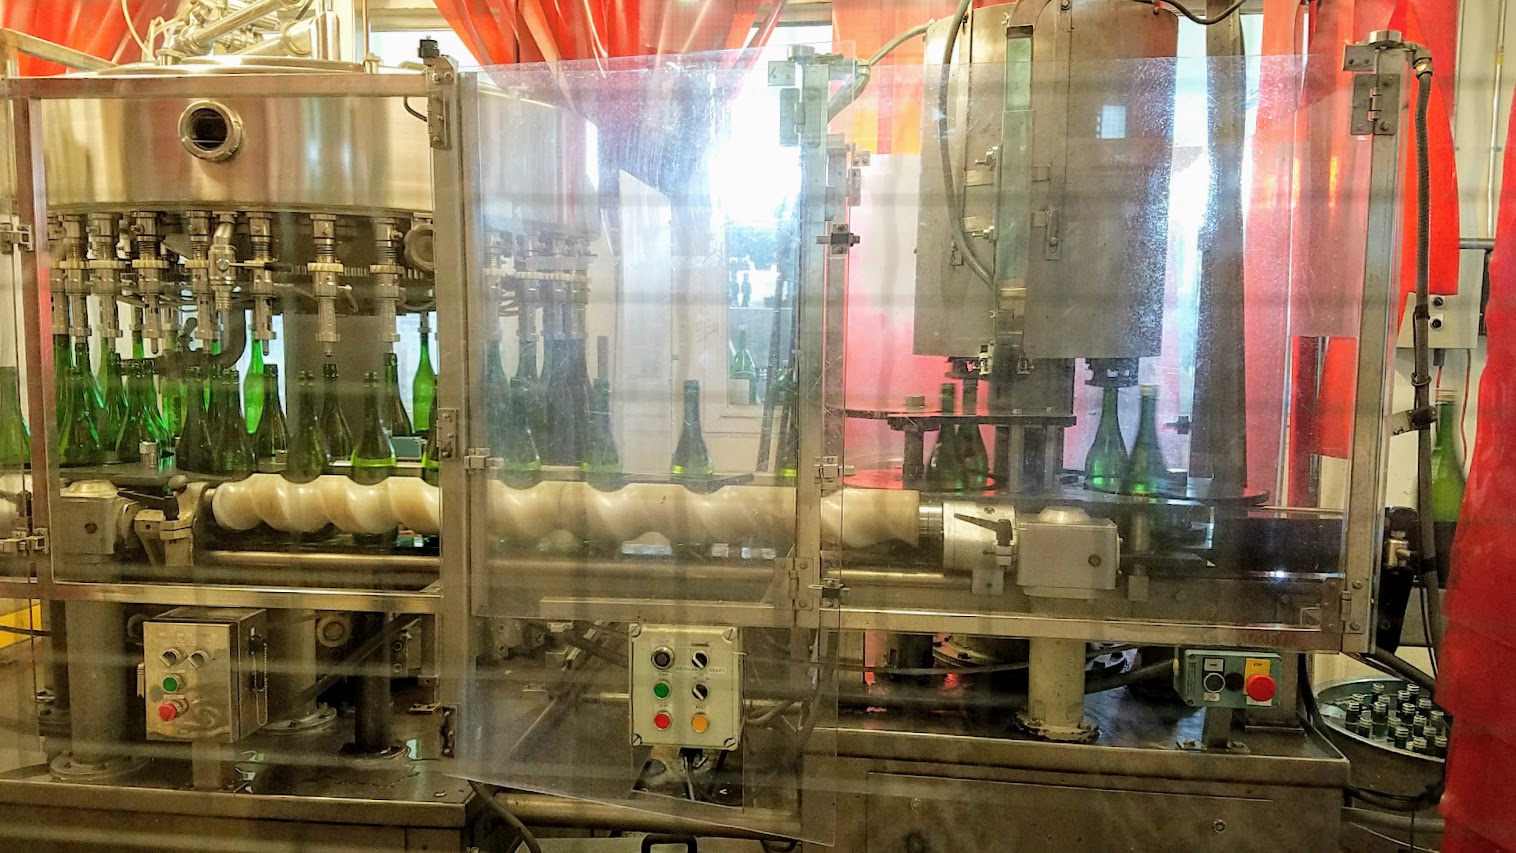 Bottling process for the sake that can be seen during the free self guided brewery tour at Gekkkeikan Sake in Folsom, California